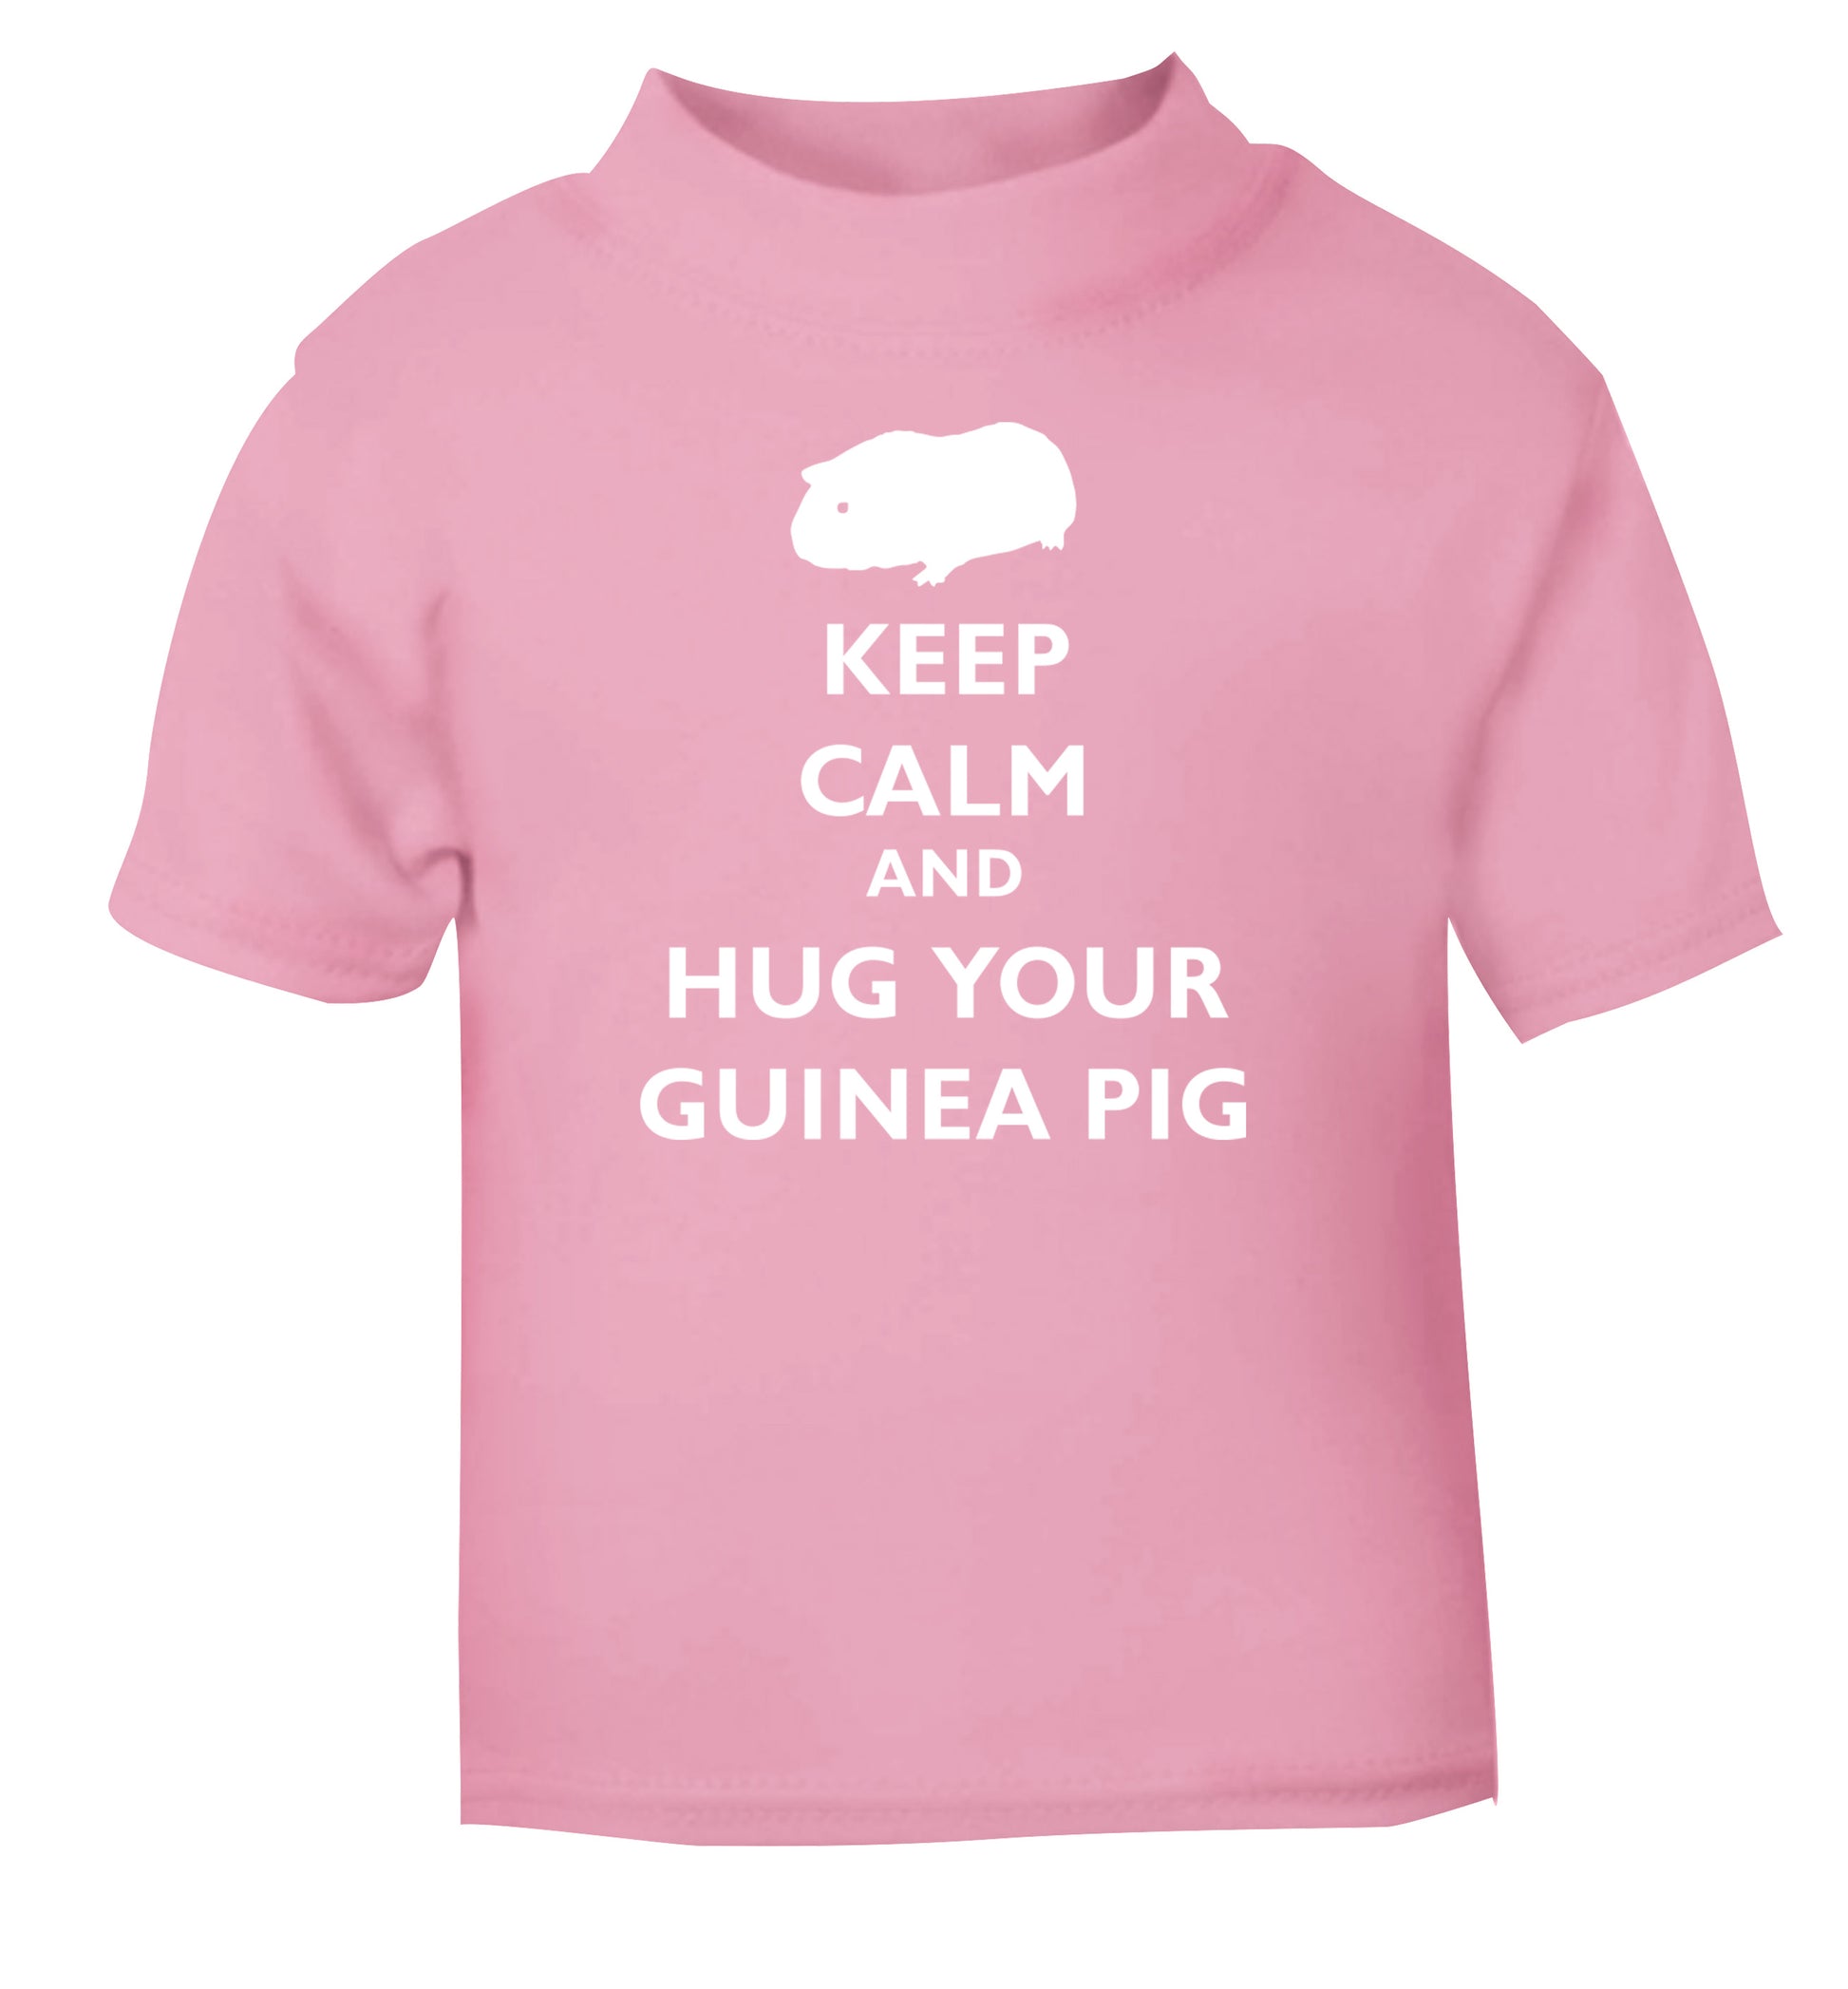 Keep calm and hug your guineapig light pink Baby Toddler Tshirt 2 Years